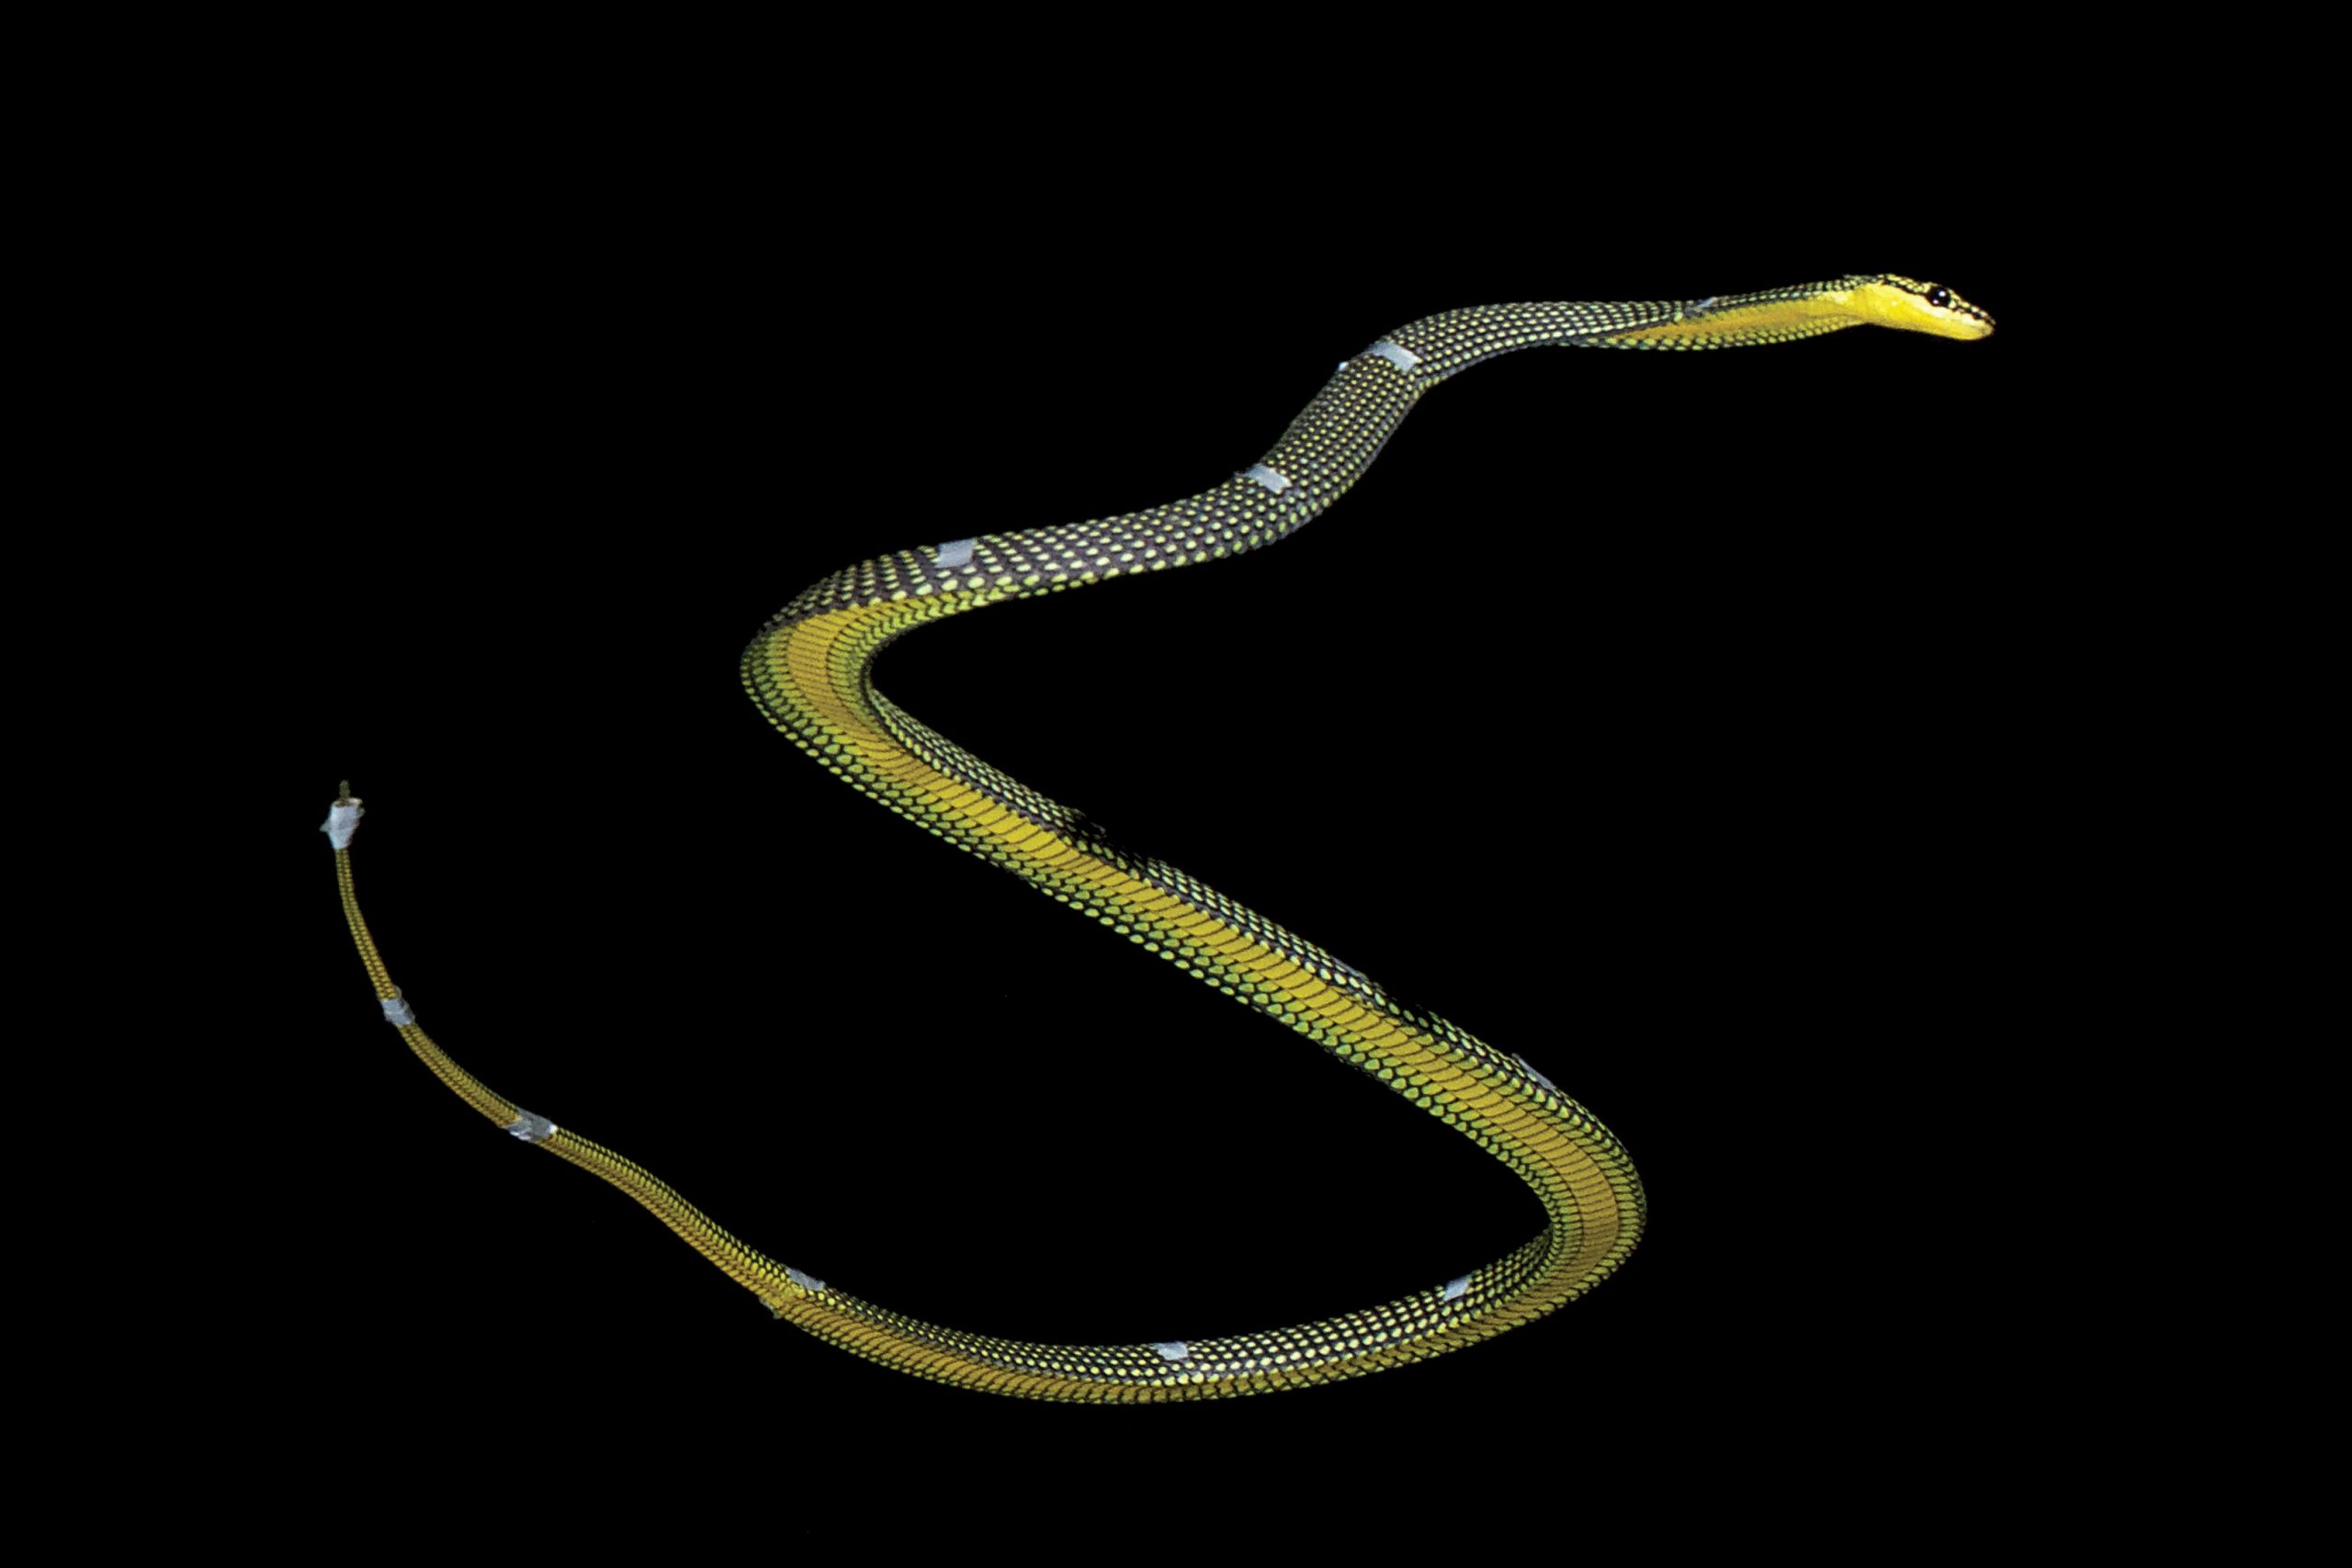 Mystery of How Flying Snakes Move Solved by 3D Modeling and Motion Capture